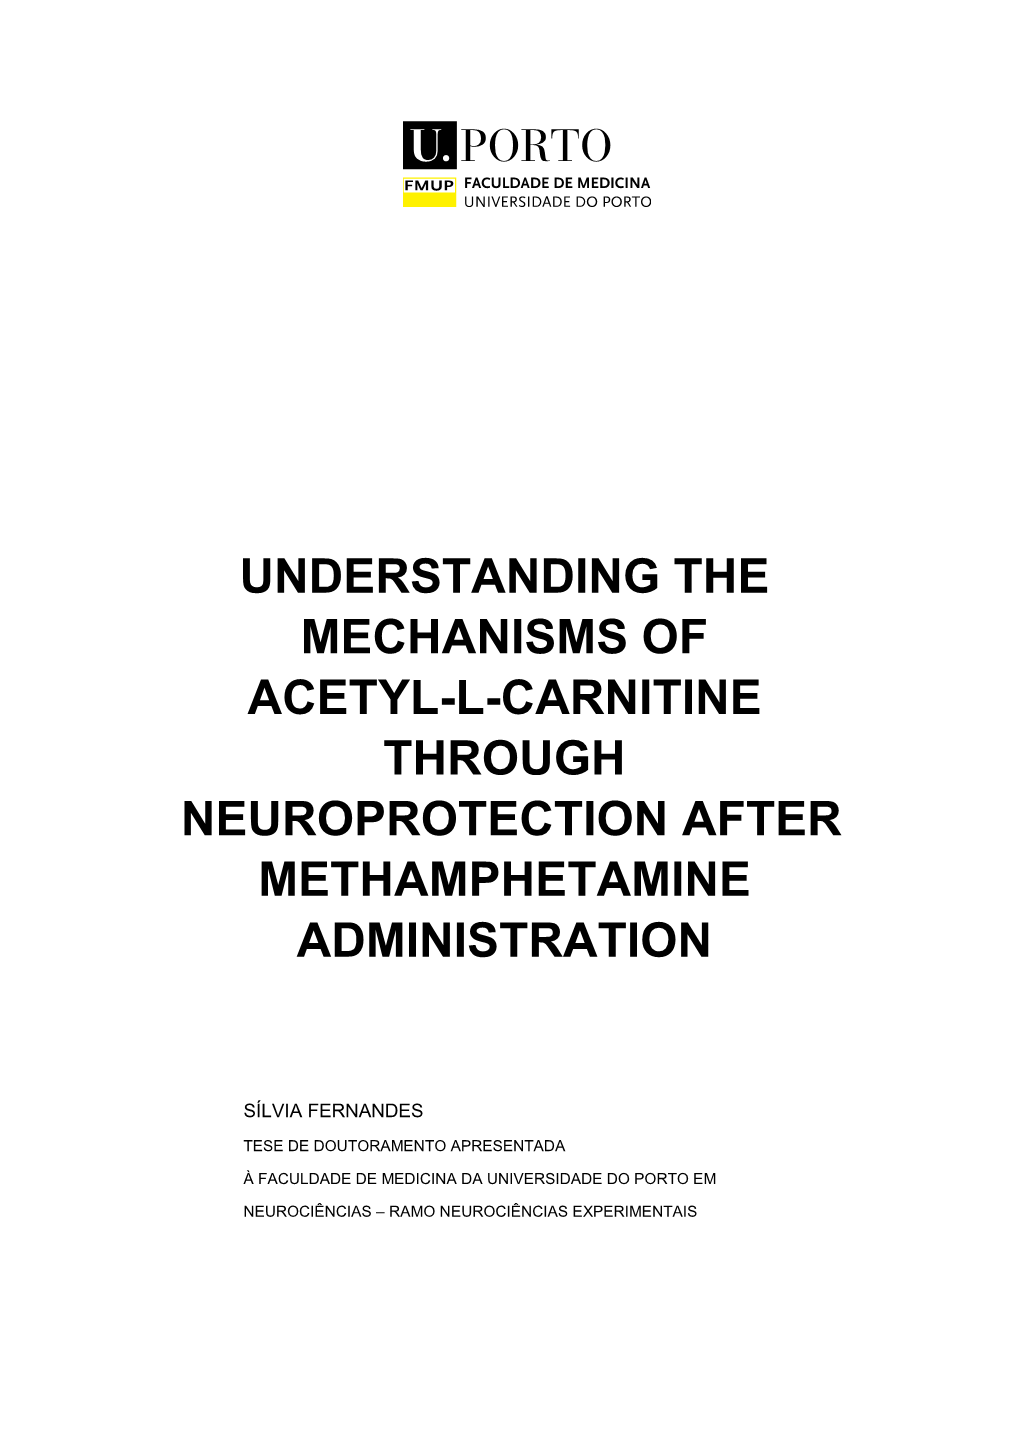 Understanding the Mechanisms of Acetyl-L-Carnitine Through Neuroprotection After Methamphetamine Administration